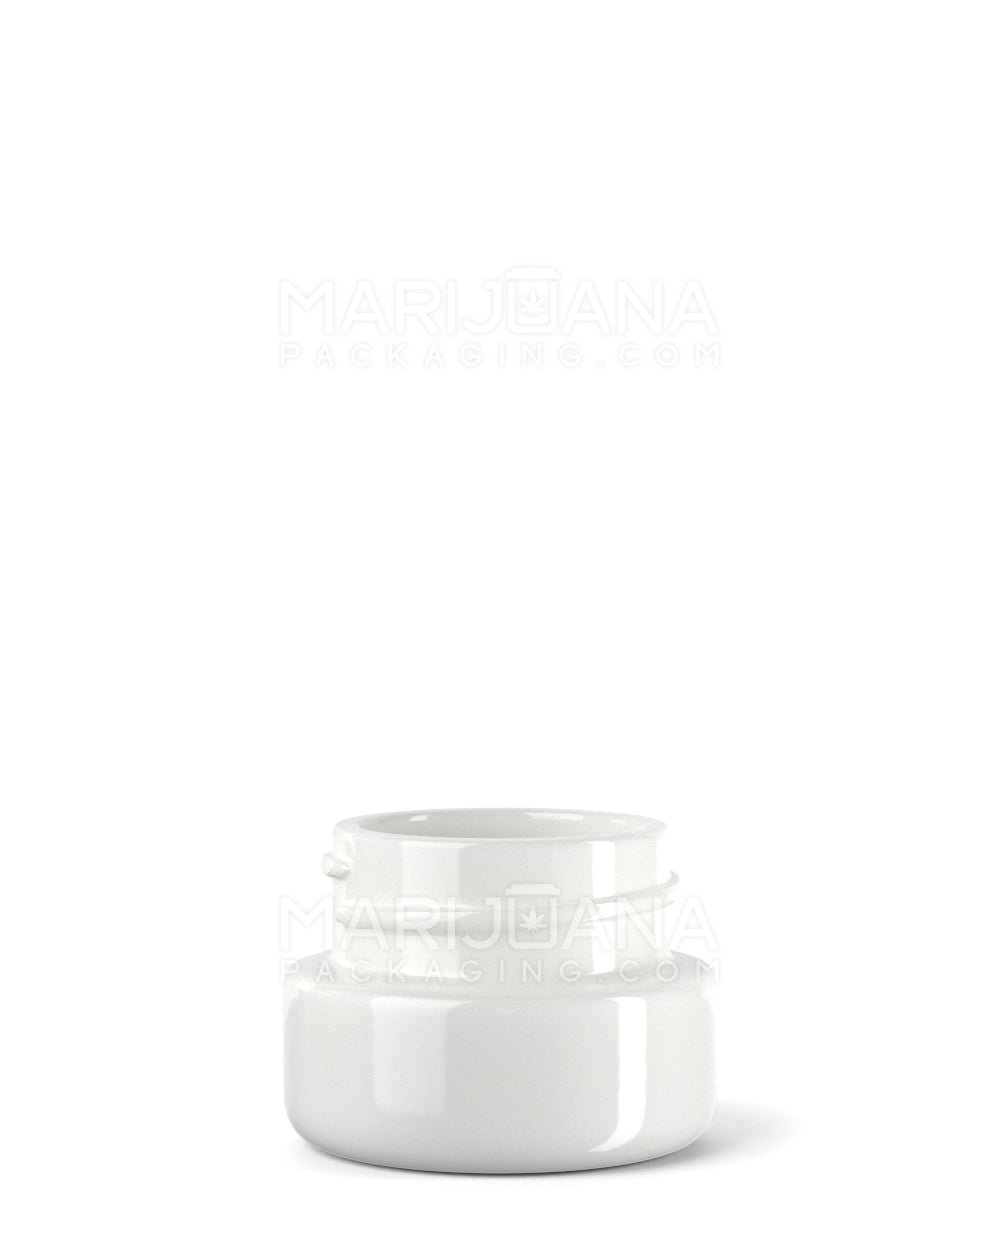 Glossy White Glass Concentrate Containers | 29mm - 5mL - 300 Count - 1